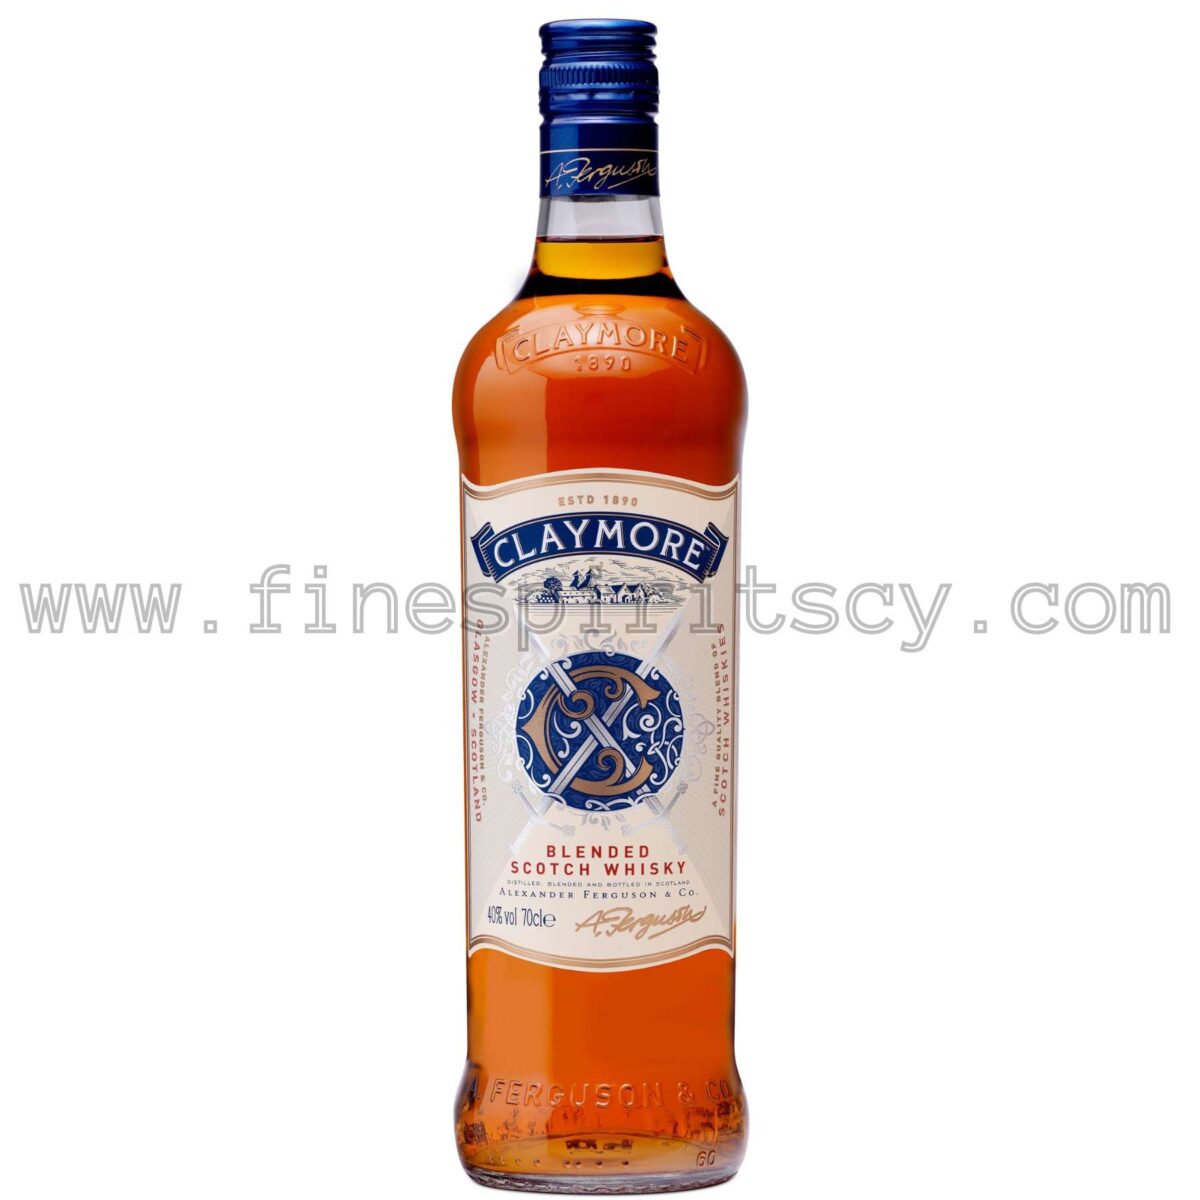 The Claymore Blended Scotch Whisky Price Cyprus FSCY 700ml 70cl 0.7L